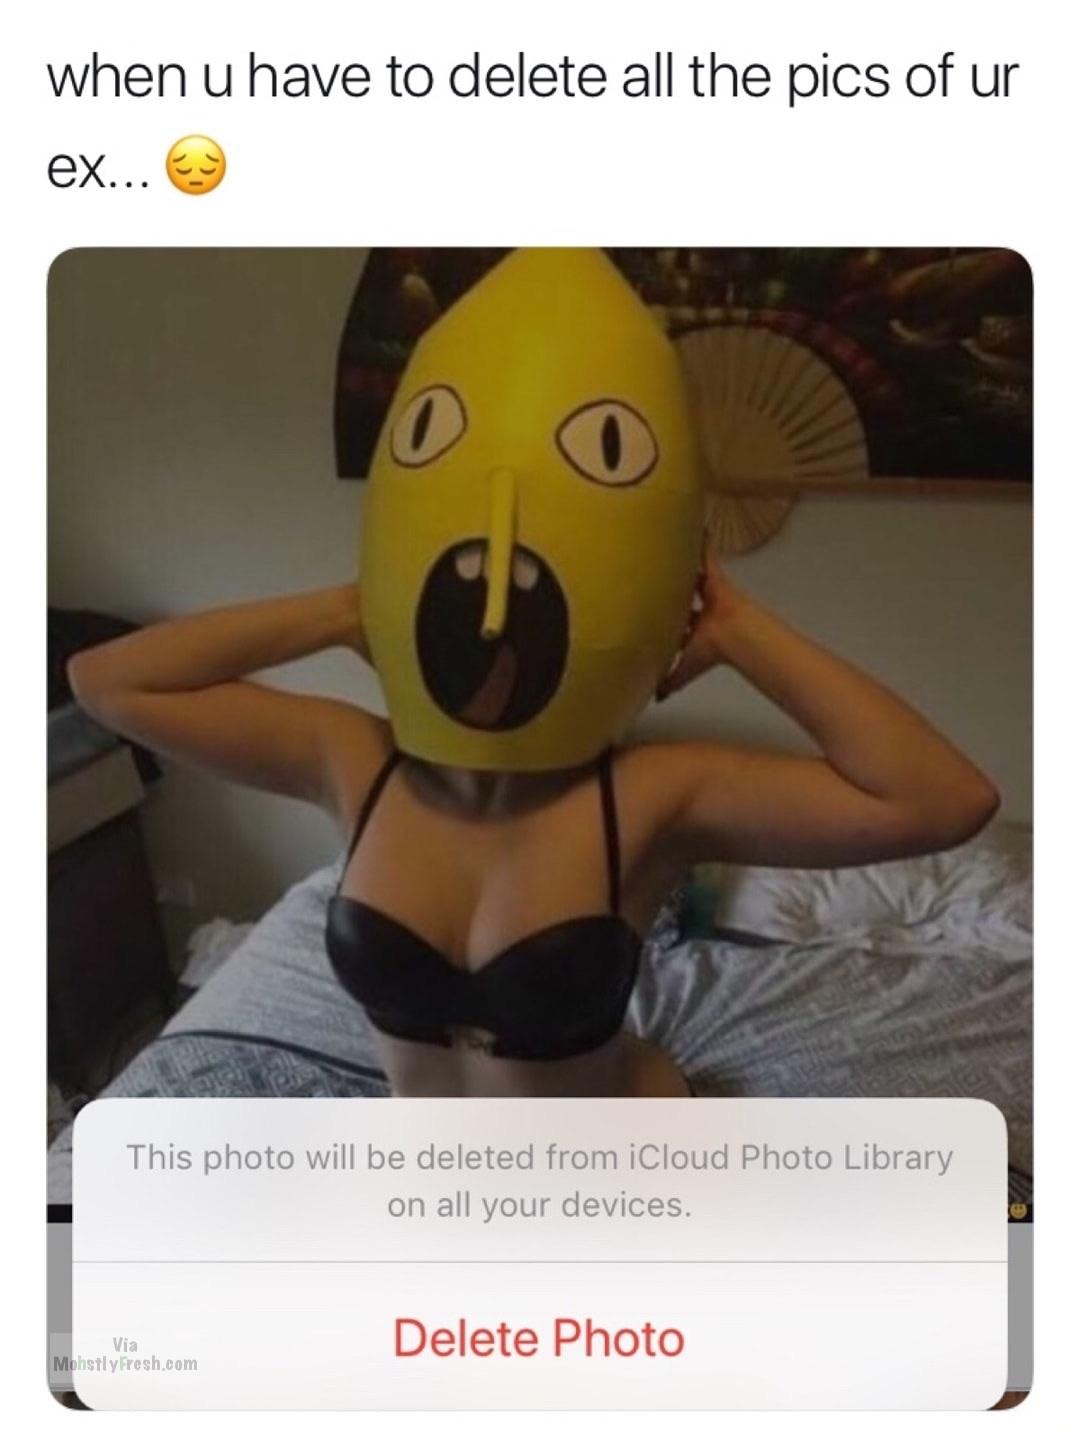 banana man memes - when u have to delete all the pics of ur ex... 3 This photo will be deleted from iCloud Photo Library on all your devices. Via Delete Photo MohstlyFresh.com